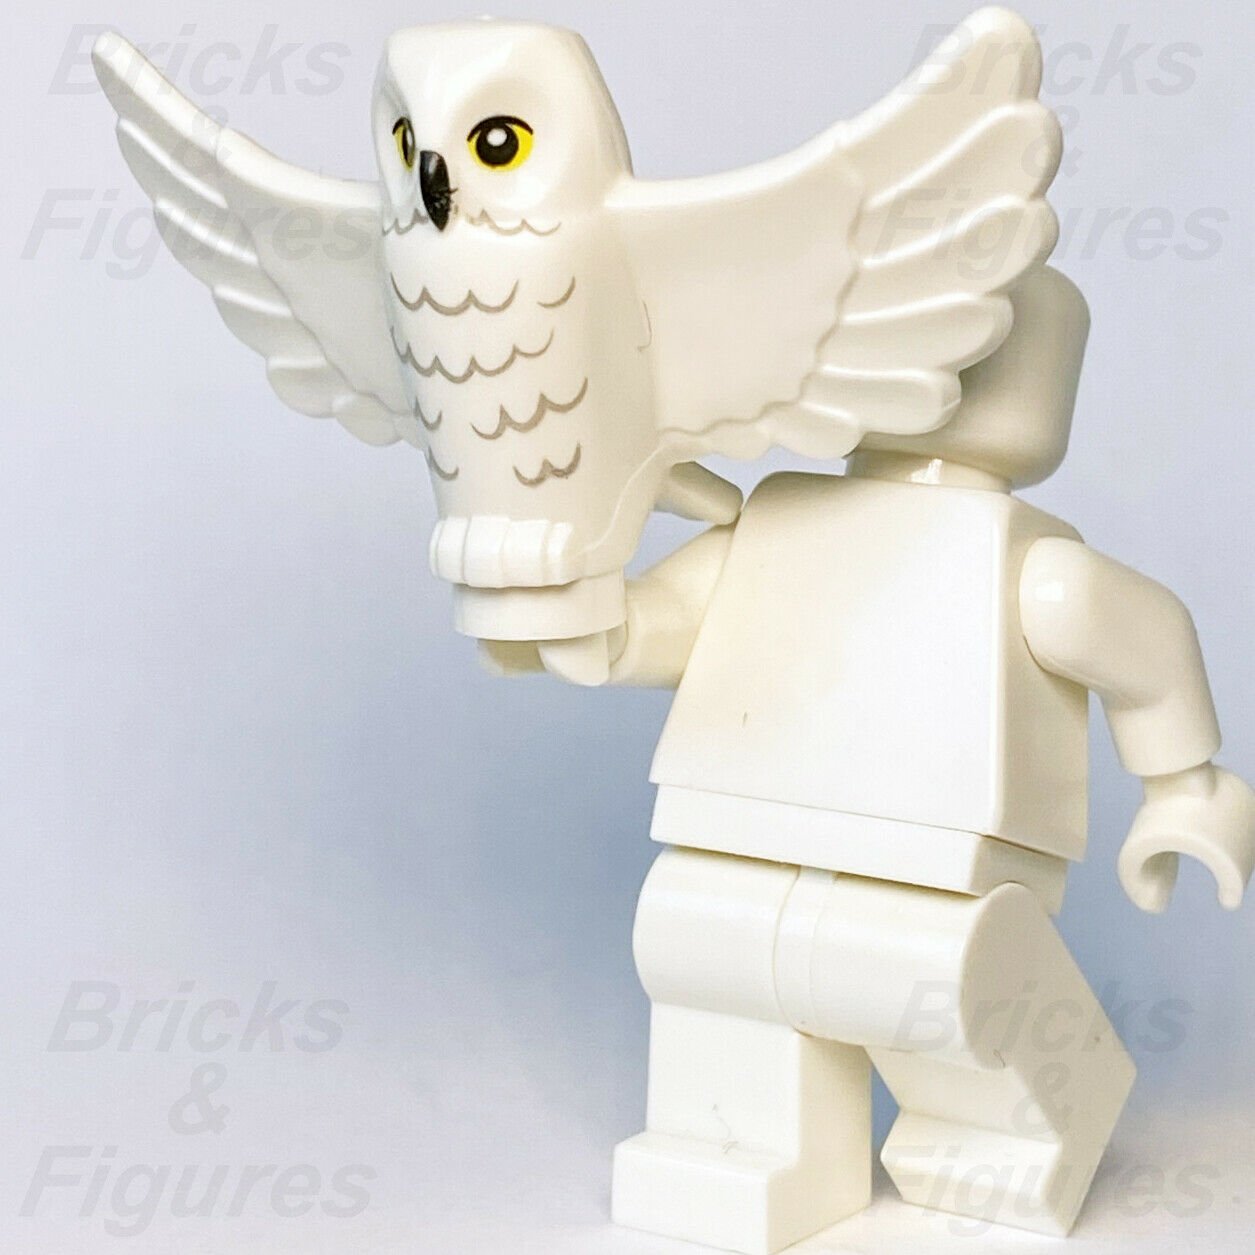 Harry Potter LEGO Hedwig White Owl Spread Wings Part 75968 75980 75978 75979 - Bricks & Figures